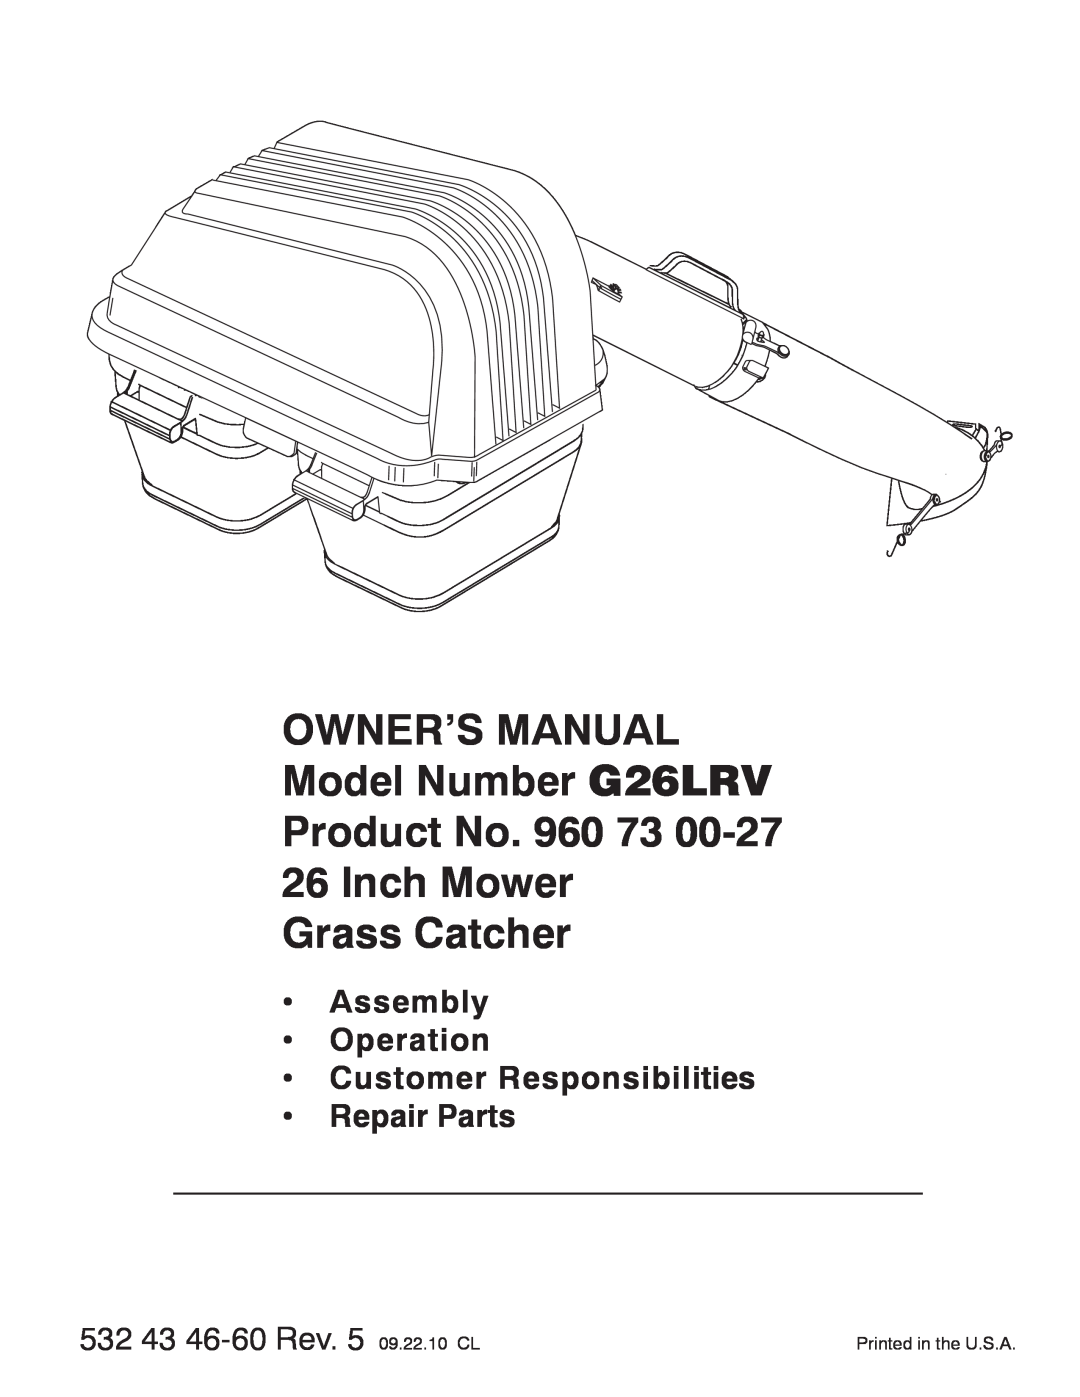 Weed Eater 960 73 00-27, G26LRV owner manual Grass Catcher, Assembly Operation Customer Responsibilities Repair Parts 